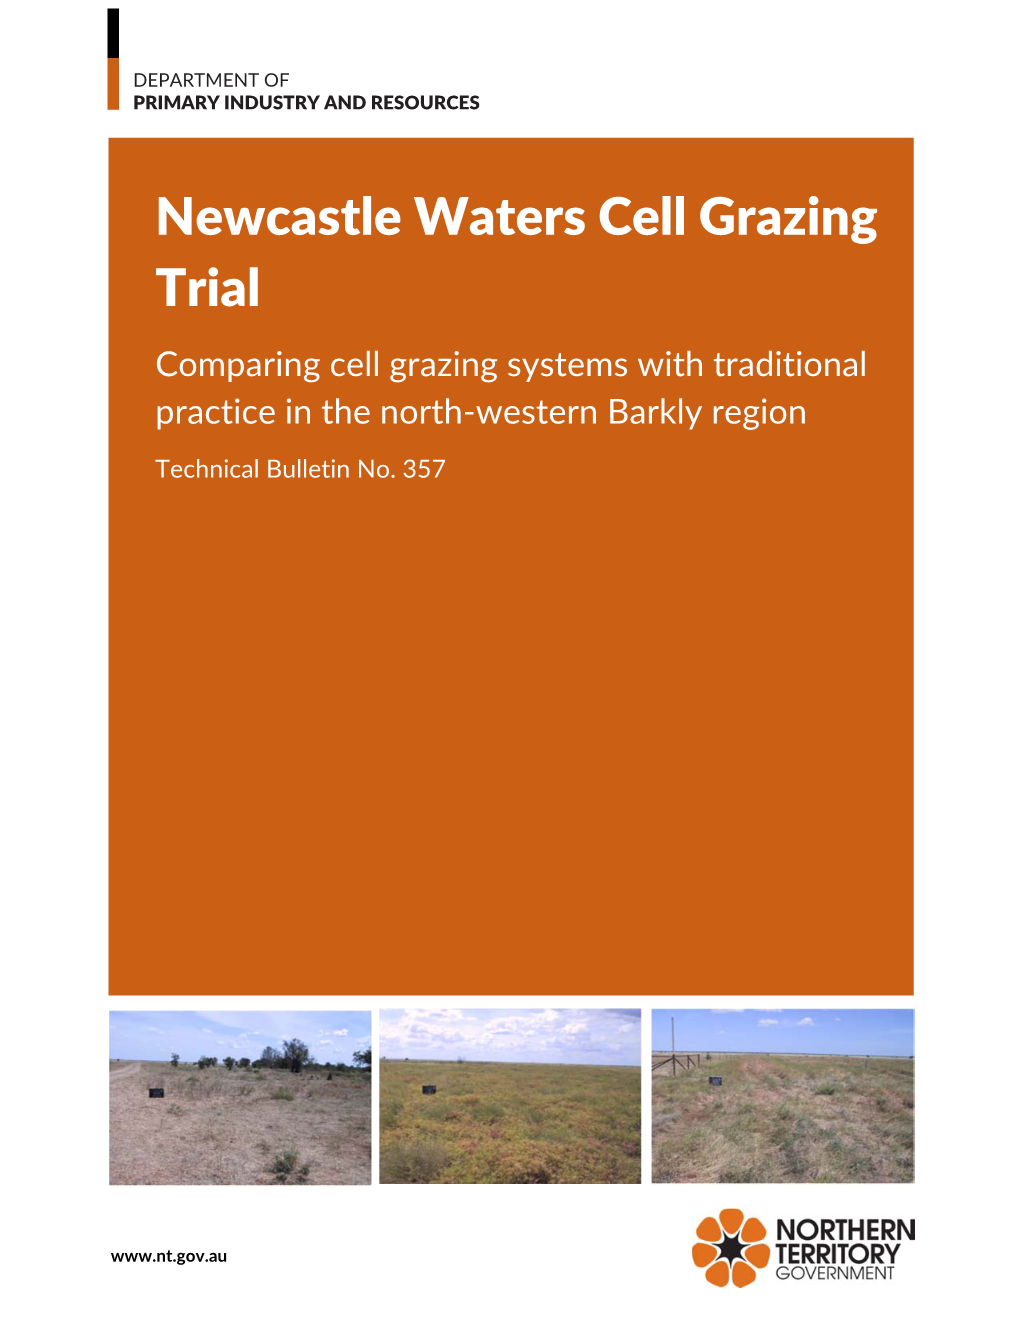 Newcastle Waters Cell Grazing Trial Comparing Cell Grazing Systems with Traditional Practice in the North‐Western Barkly Region